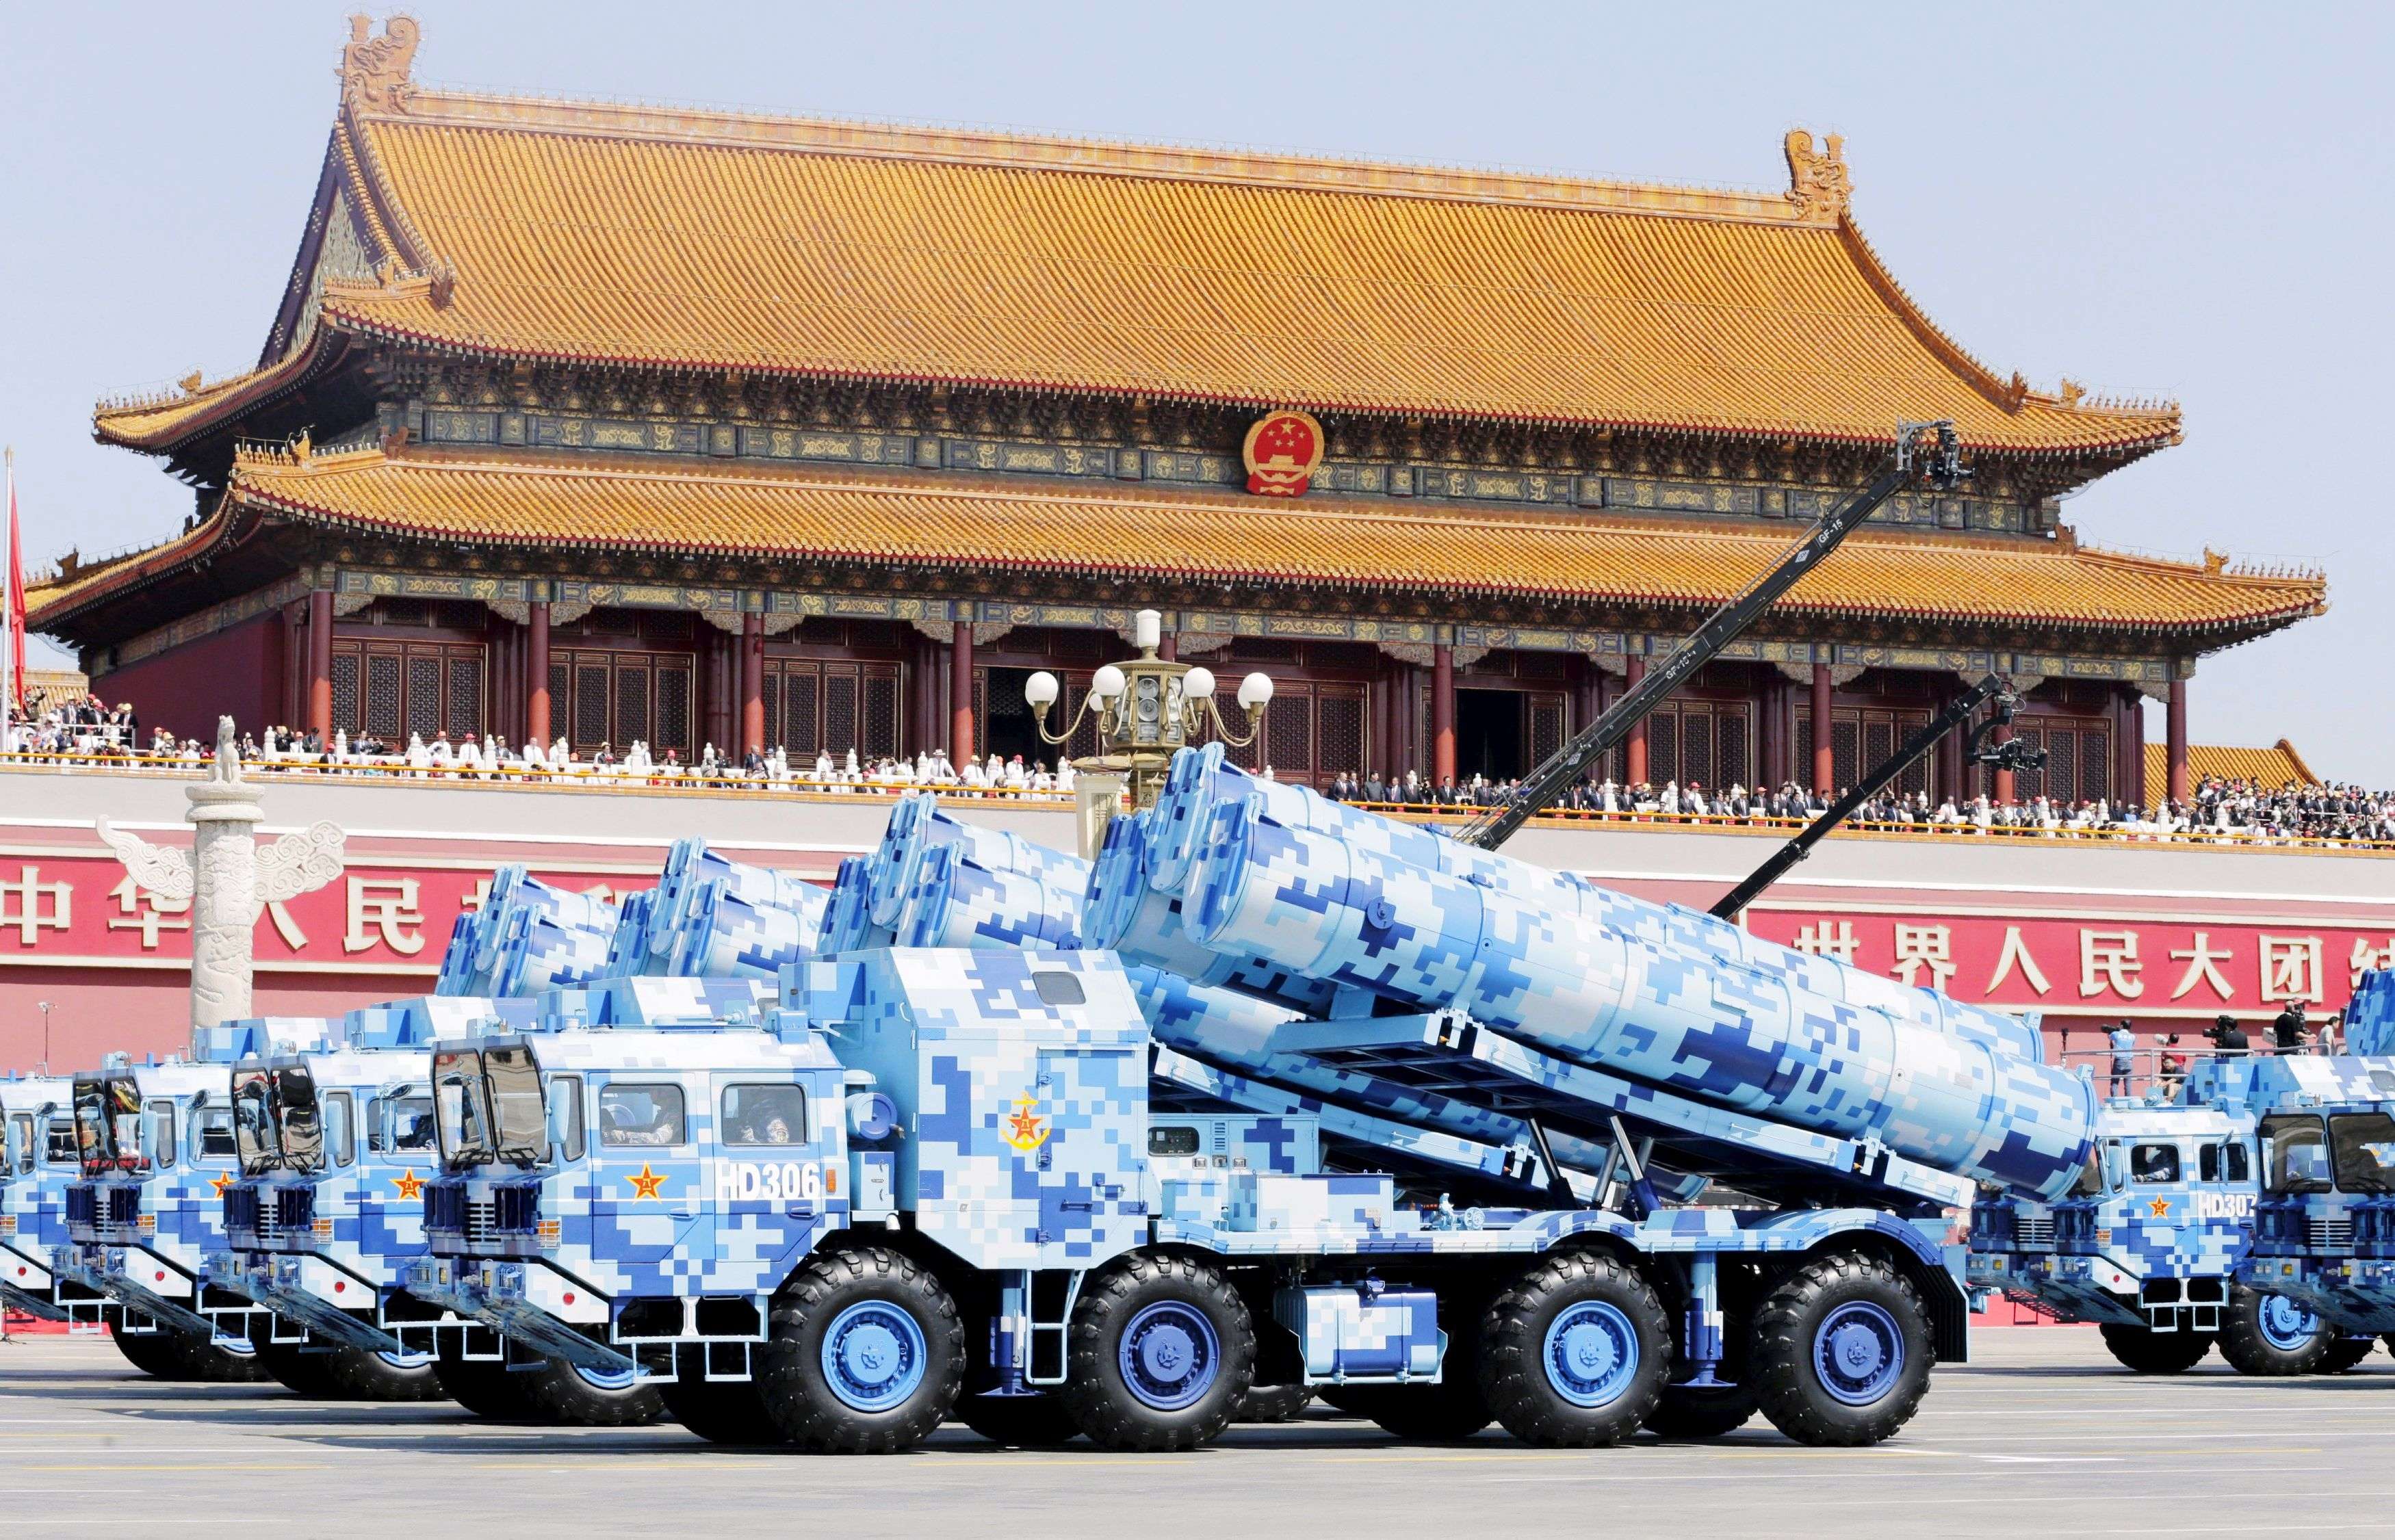 Military vehicles carrying shore-to-ship missiles drive past the Tiananmen Gate during a military parade to mark the 70th anniversary of the end of World War Two, in Beijing, China, September 3, 2015. REUTERS/Jason Lee